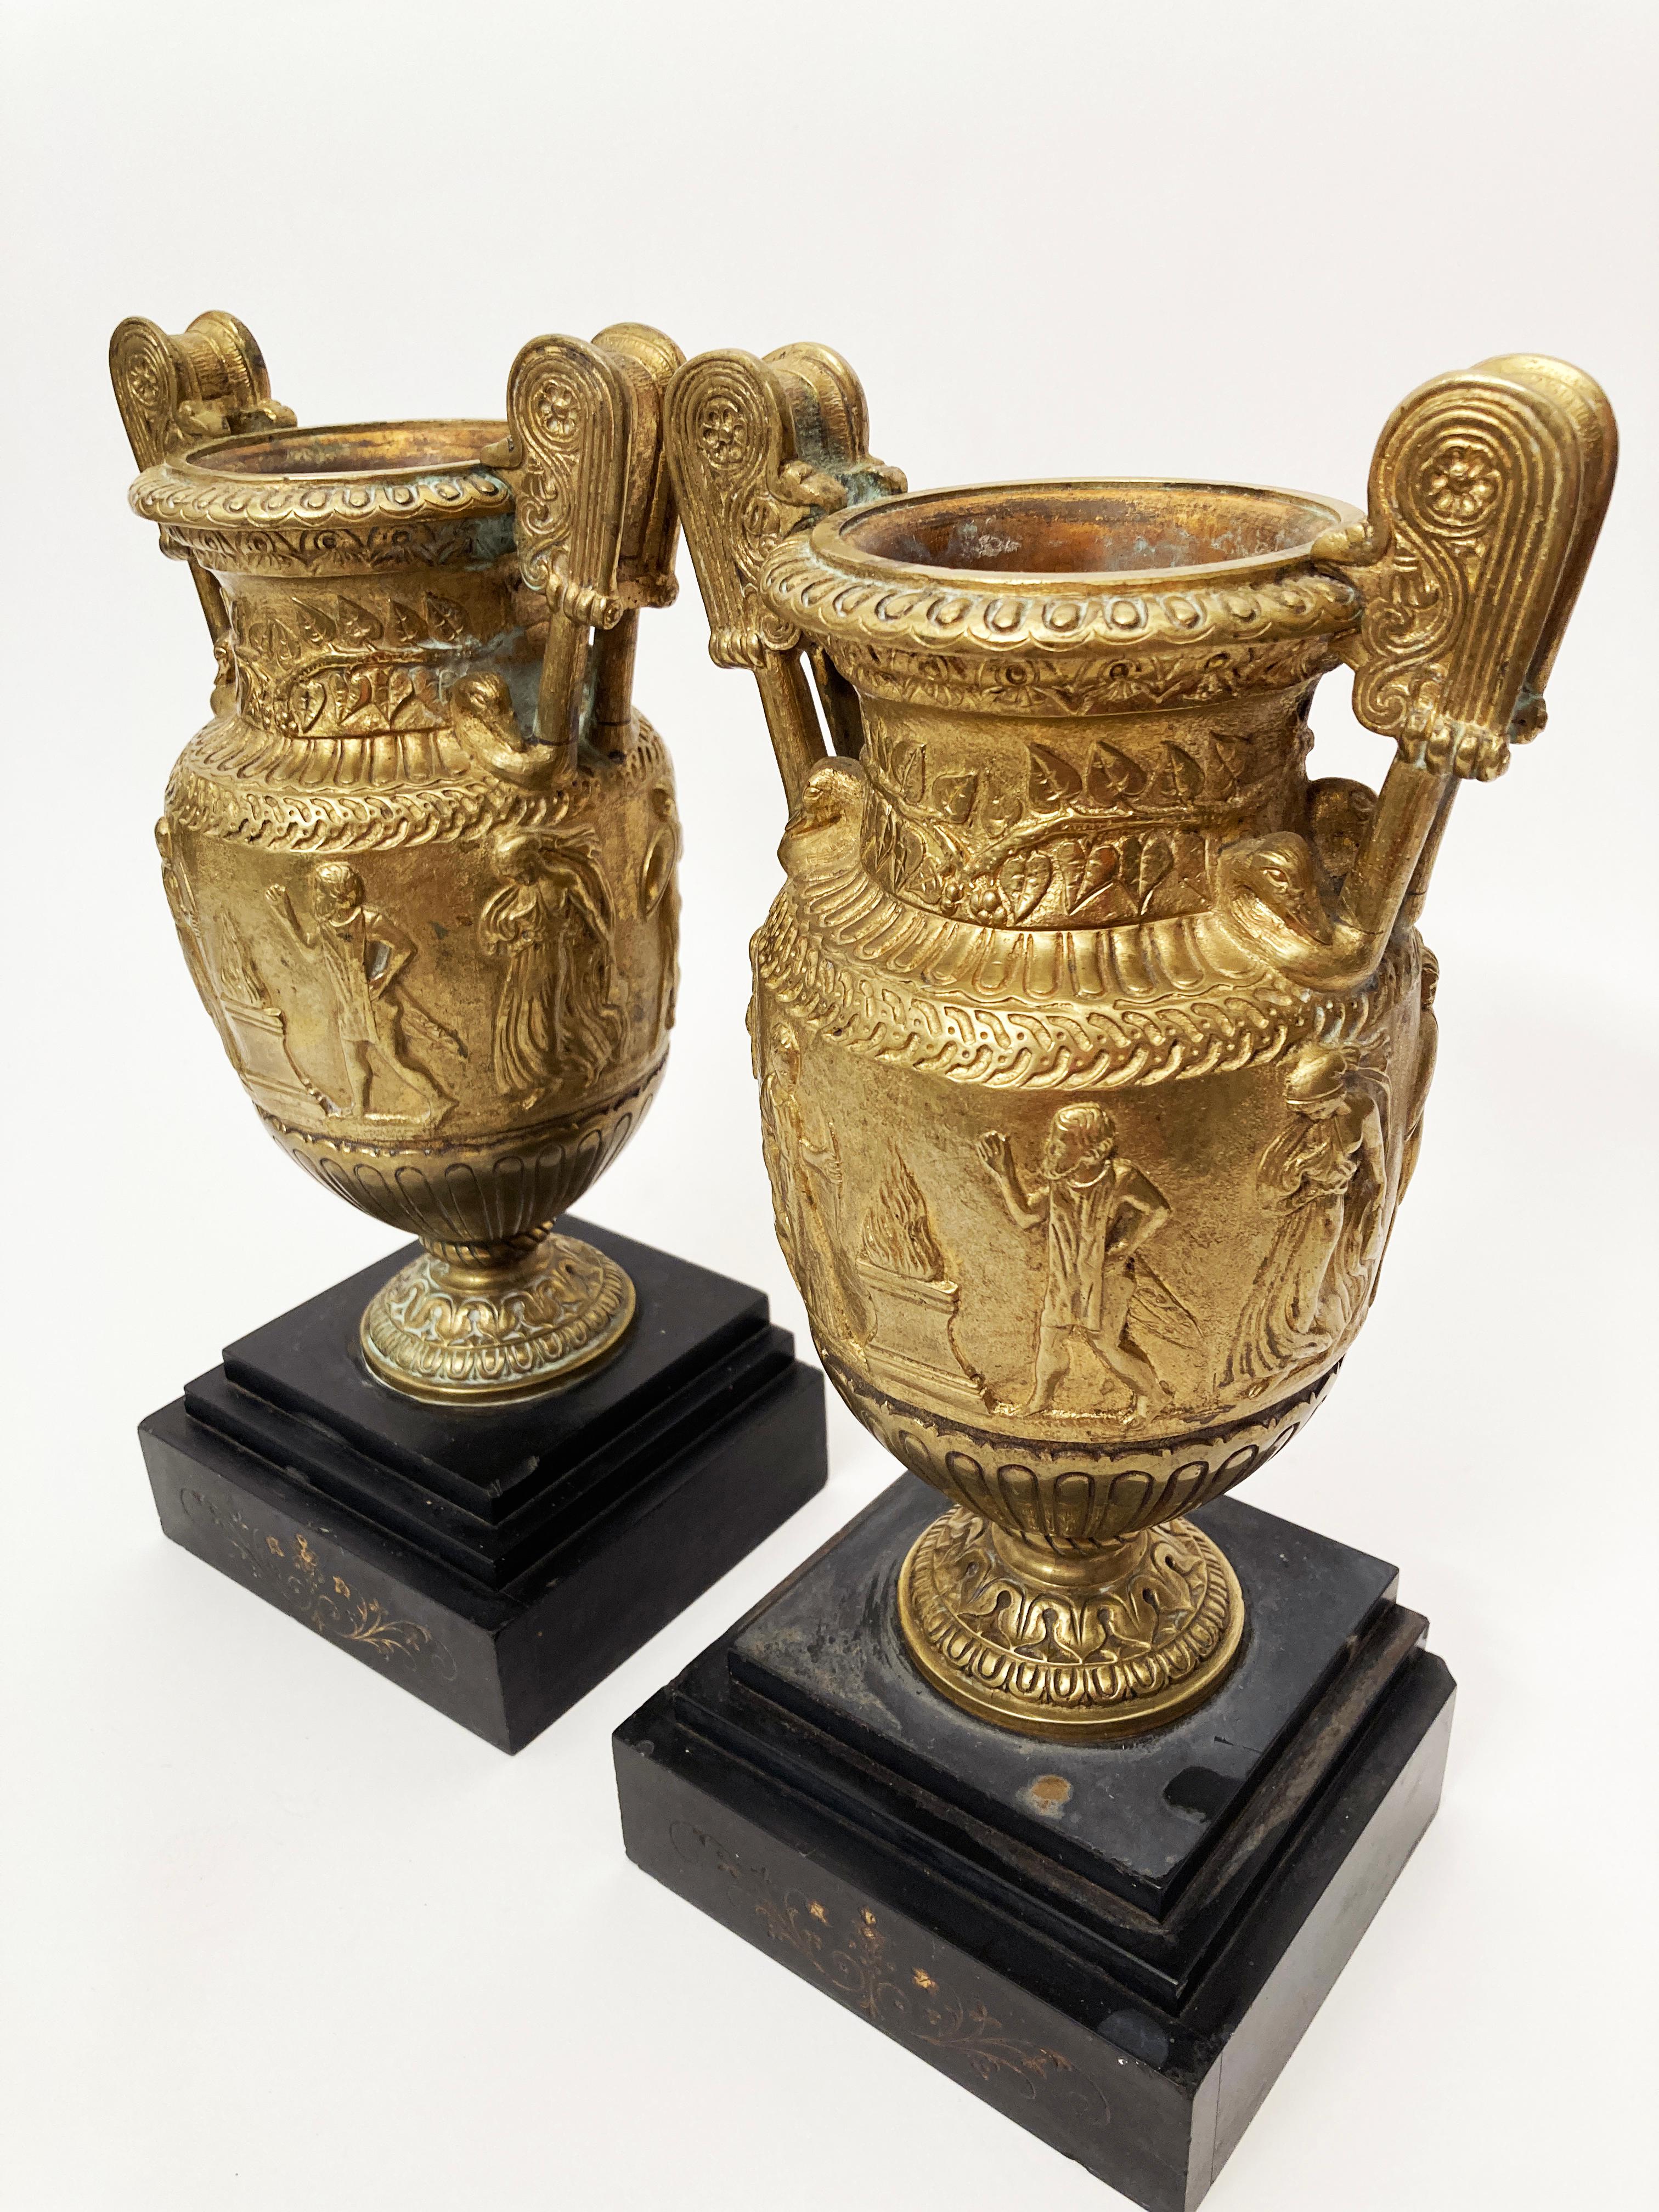 This pair of early 19th century Grand Tour Period bronze gilt volute krater urns on stone bases are absolutely breathtaking. The base is a heavy black slate with etched Neo-classic floral motifs on the front of each base. The metal is stunning with